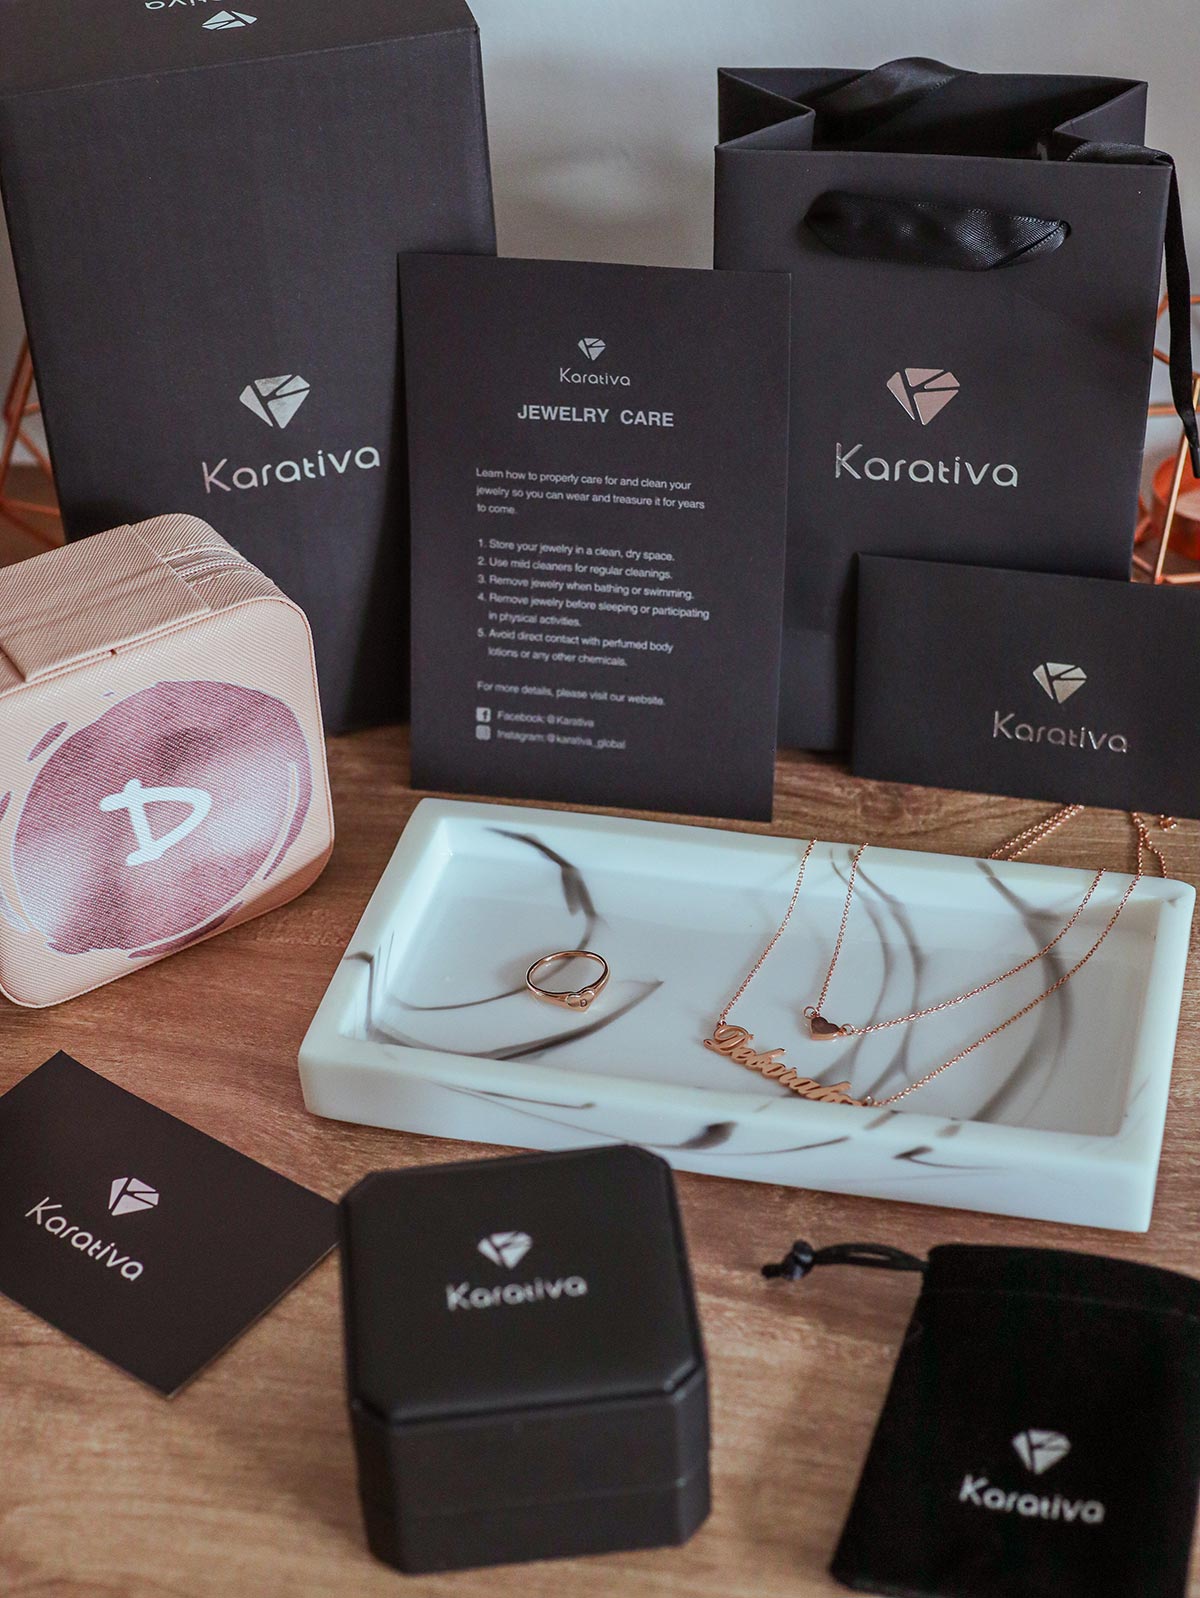 Karativa packaging jewellery care and boxes